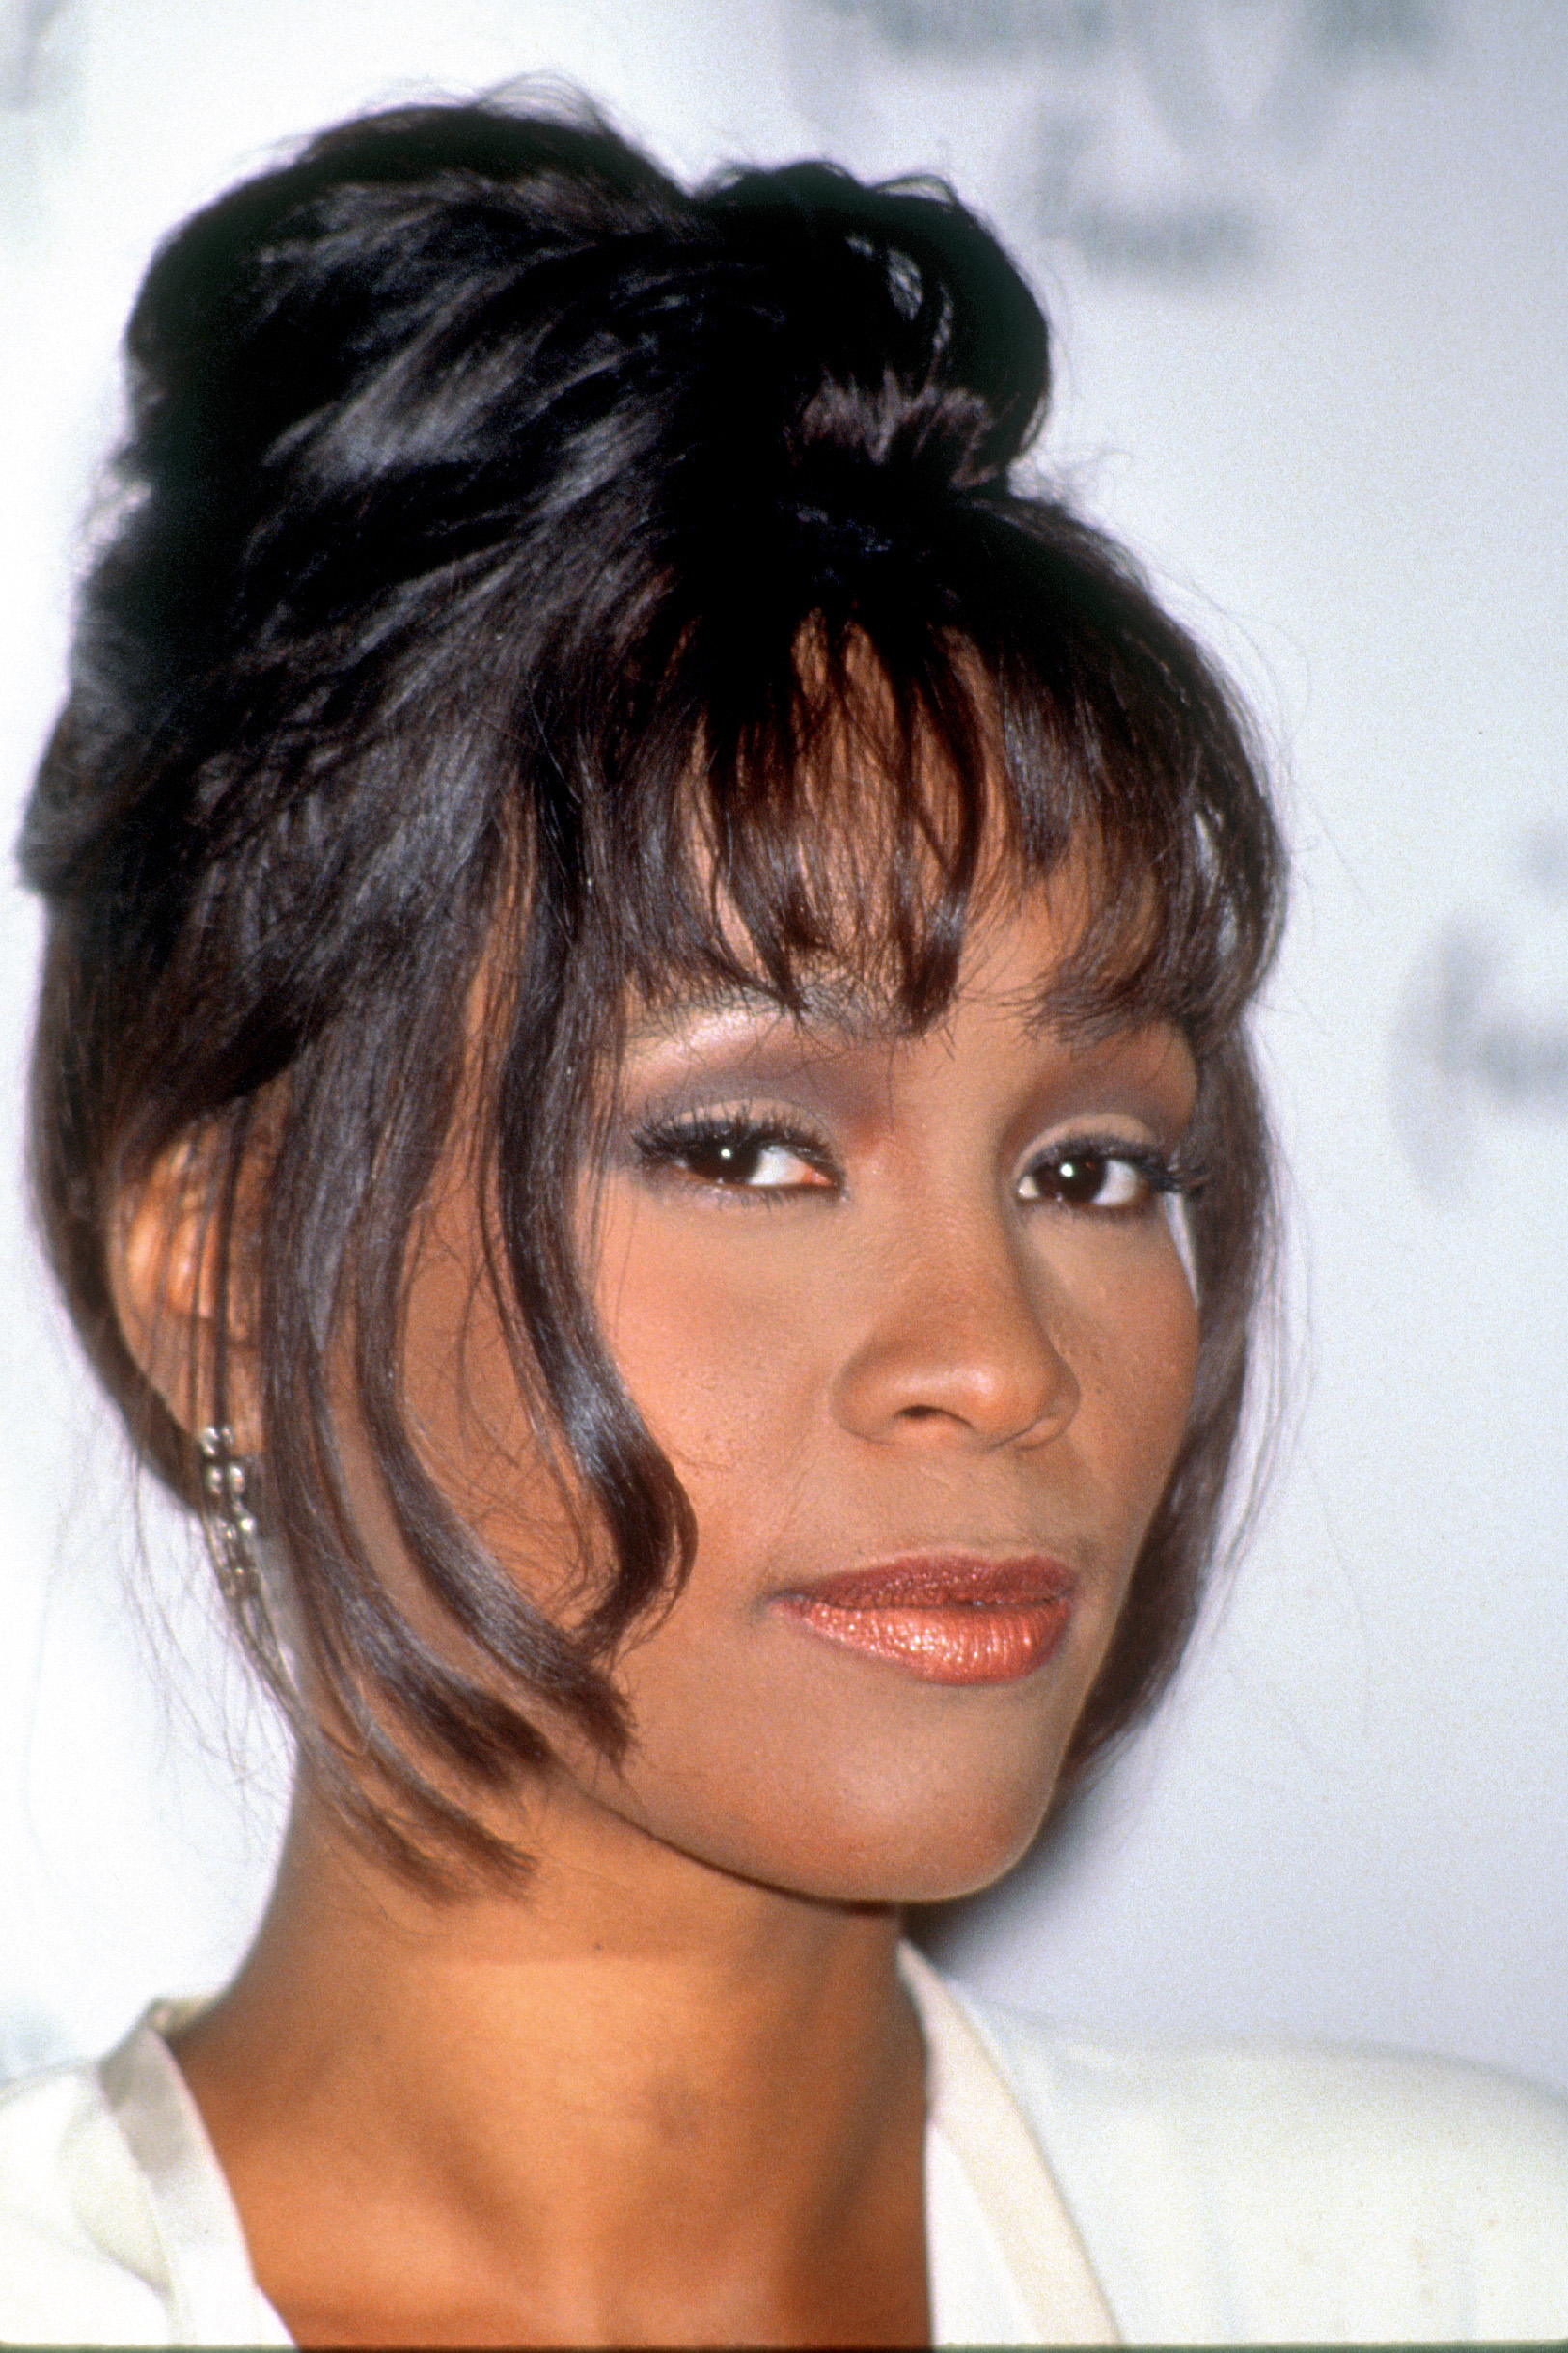 Whitney Houston at the American Music Awards in 2002 | Source: Getty Images